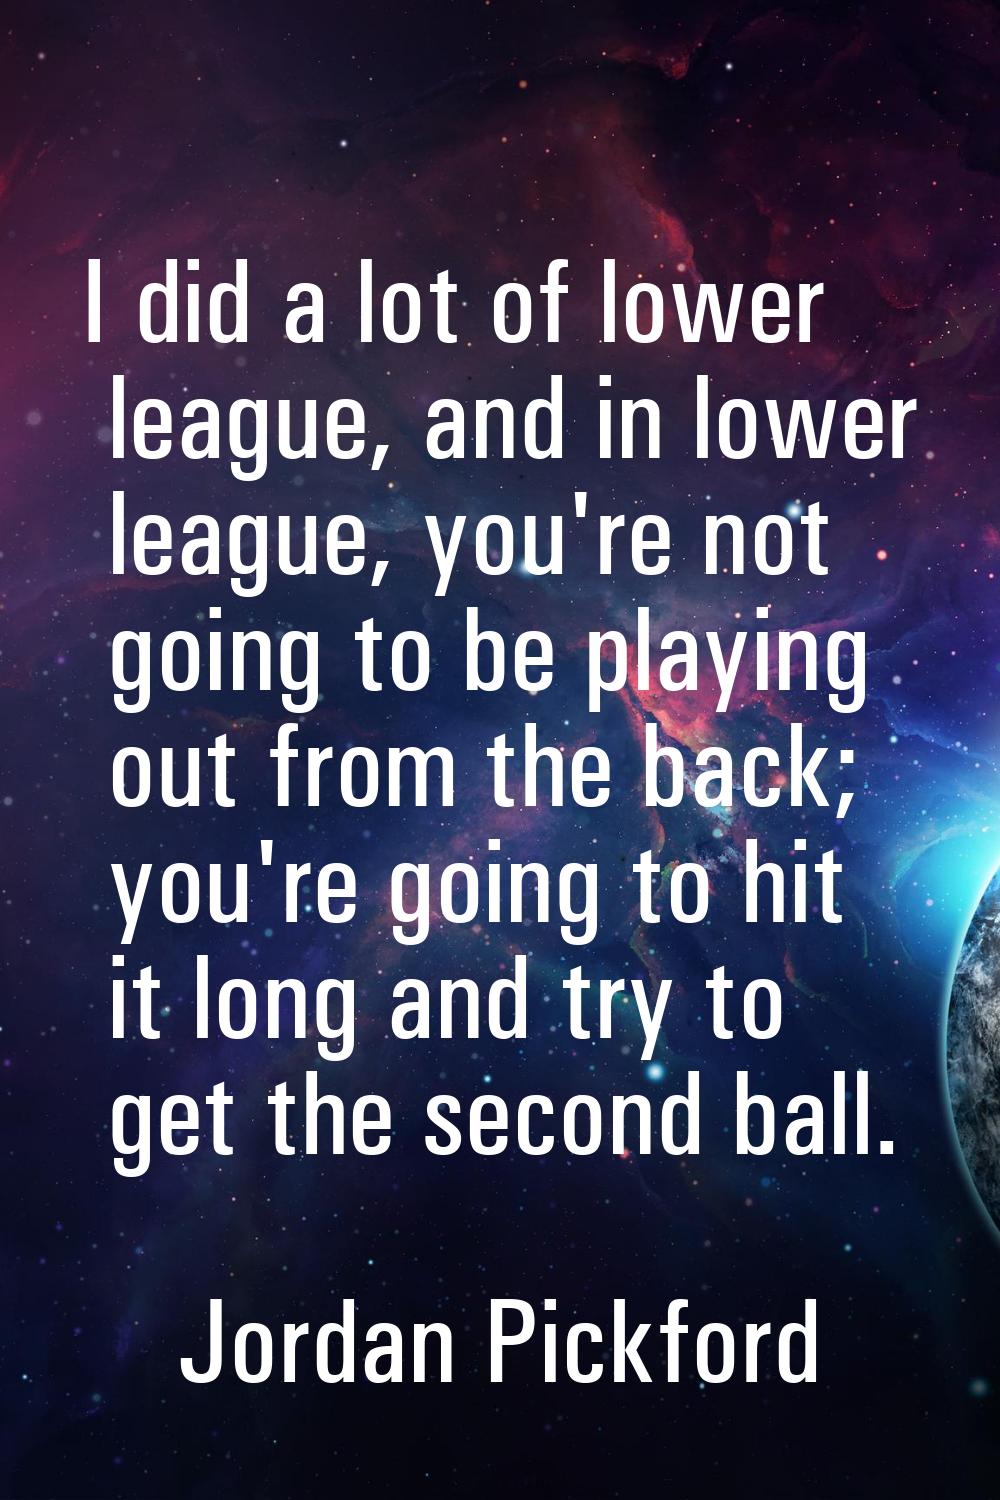 I did a lot of lower league, and in lower league, you're not going to be playing out from the back;